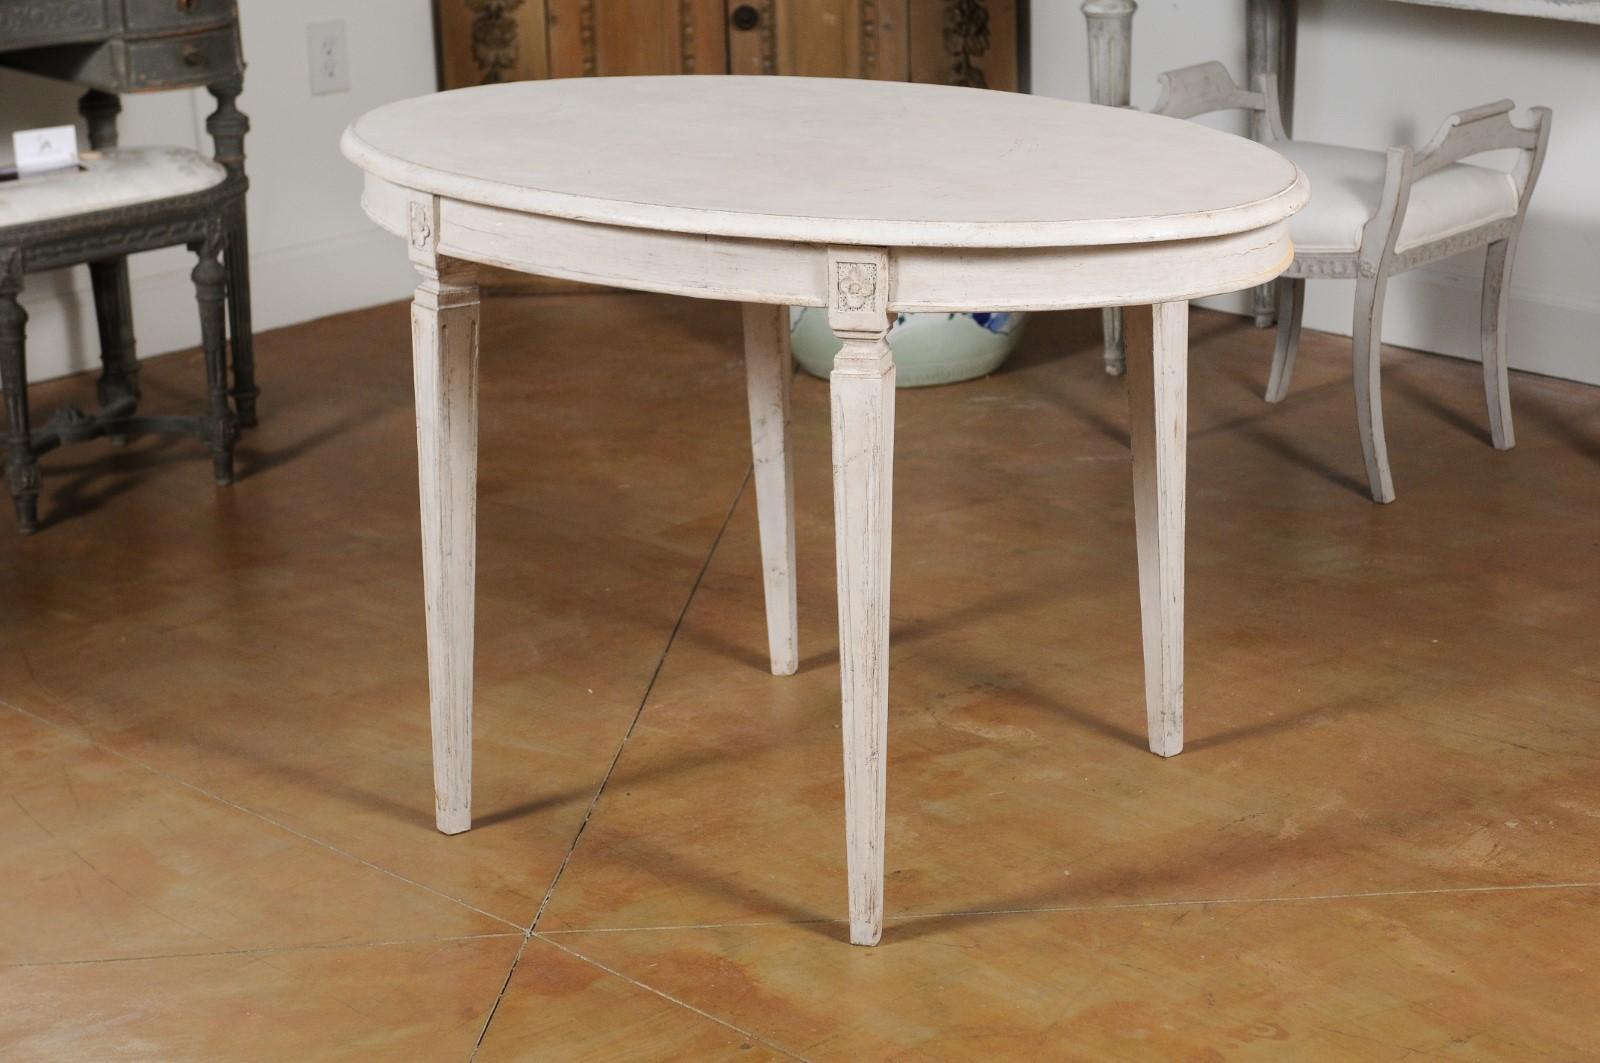 19th Century Swedish Gustavian Style 1880s Oval Top Painted Table with Tapered Fluted Legs